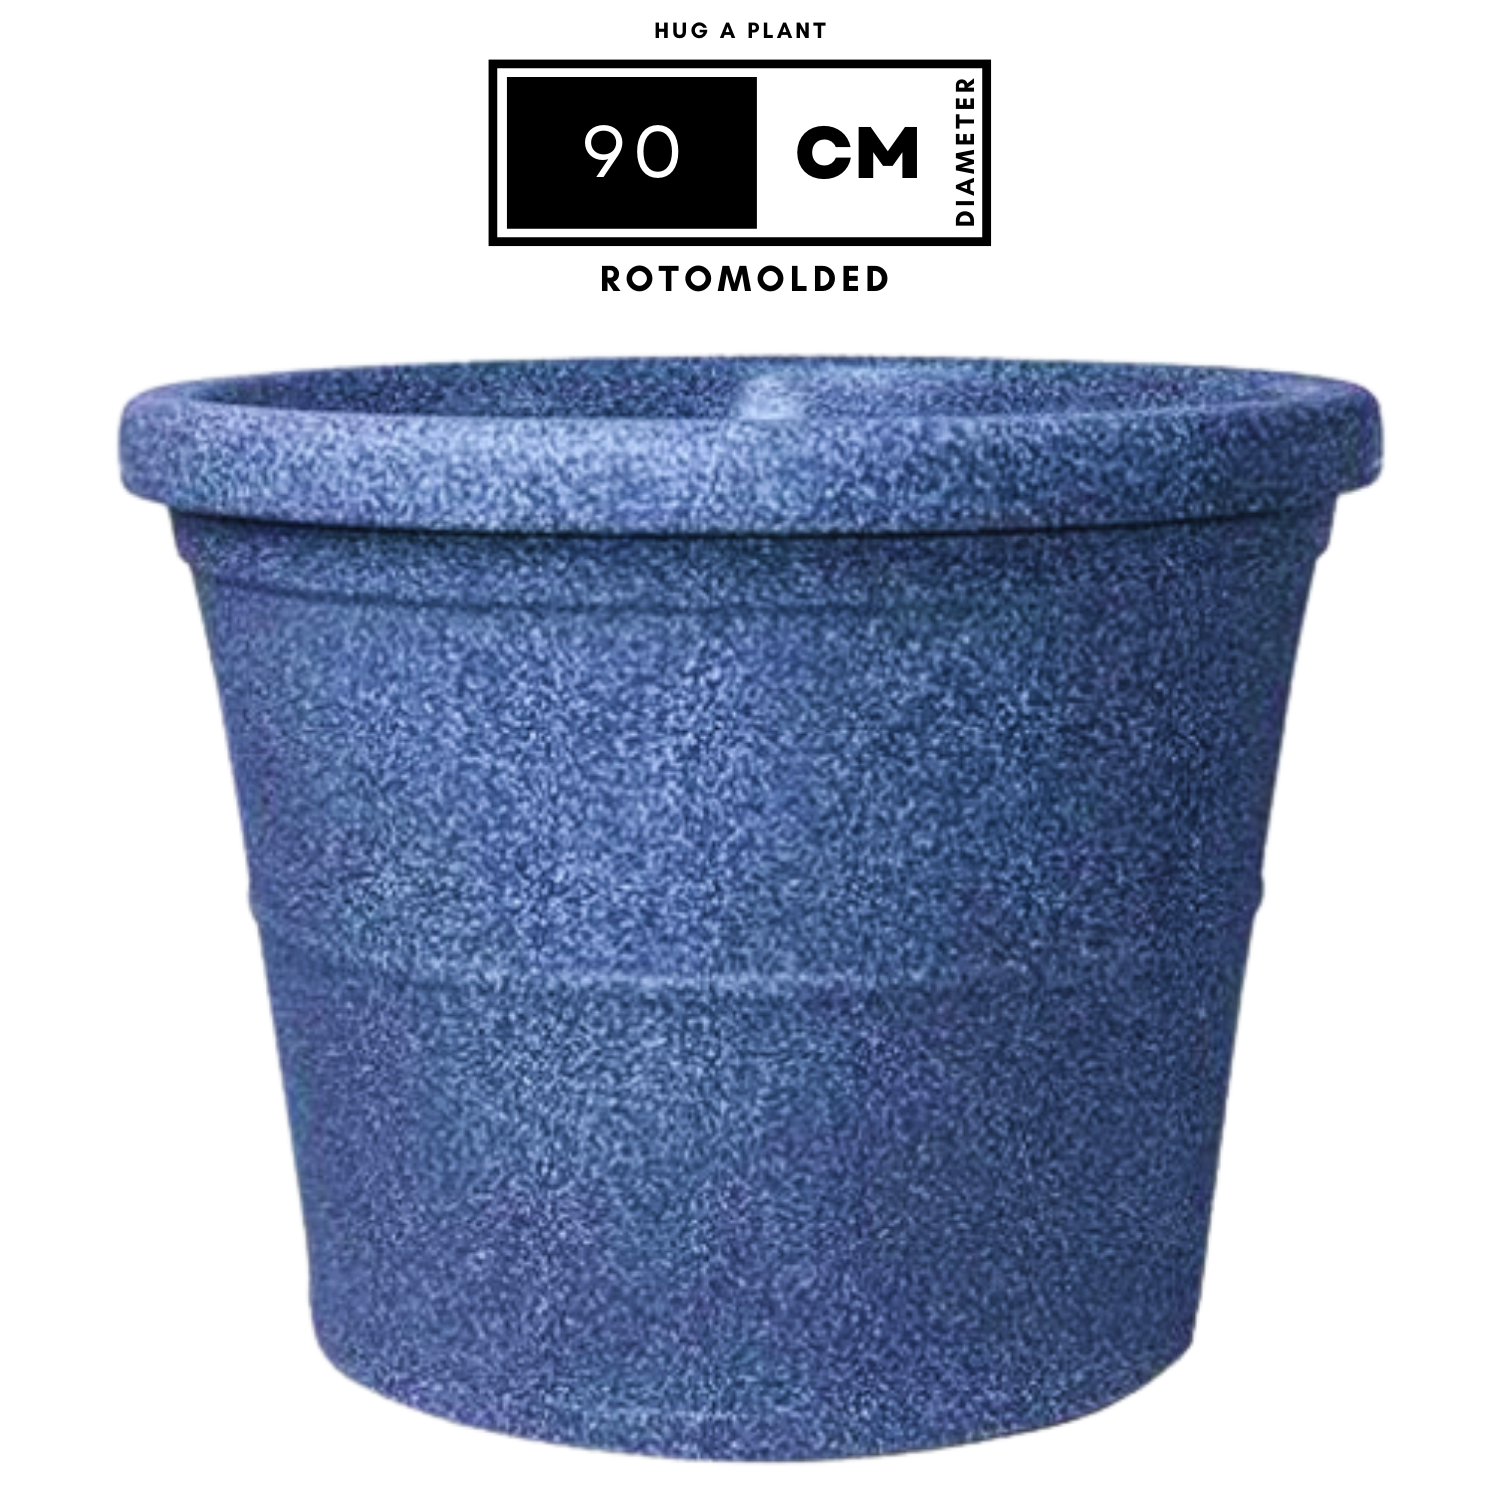 Duro Rotomolded Round Plastic Pot For Home & Garden (Midnight Stone Finish, Pack Of 1)